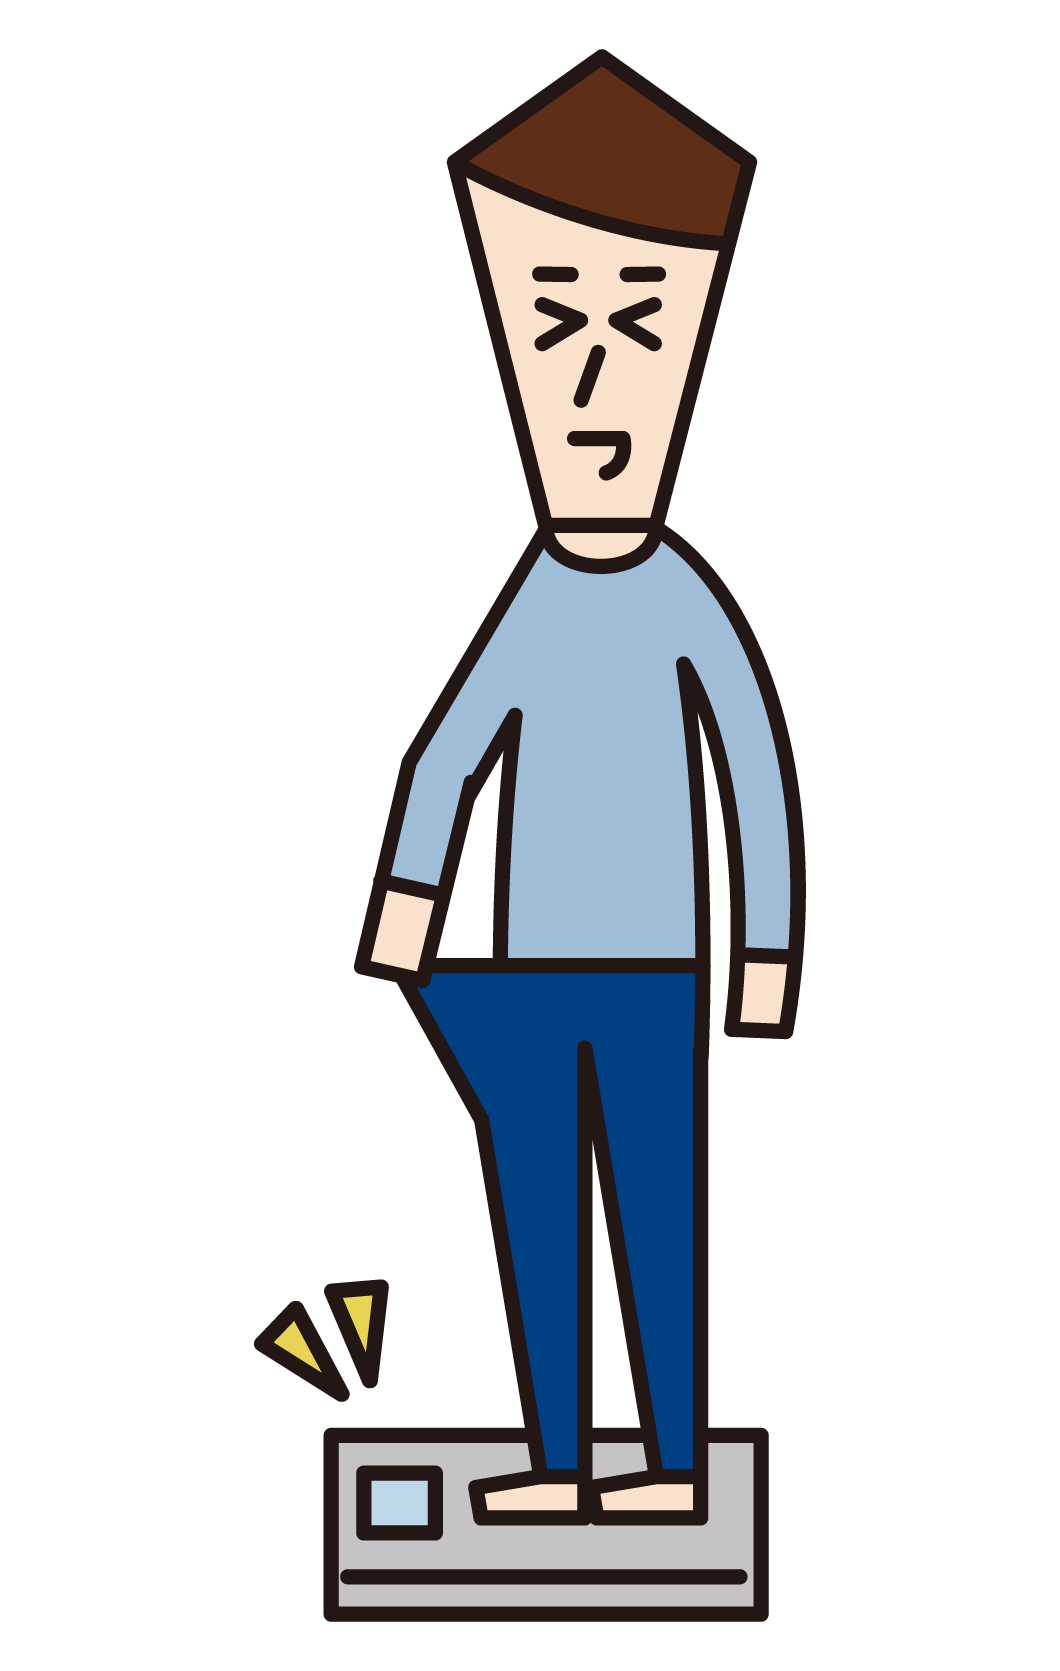 Illustration of a man who has lost weight